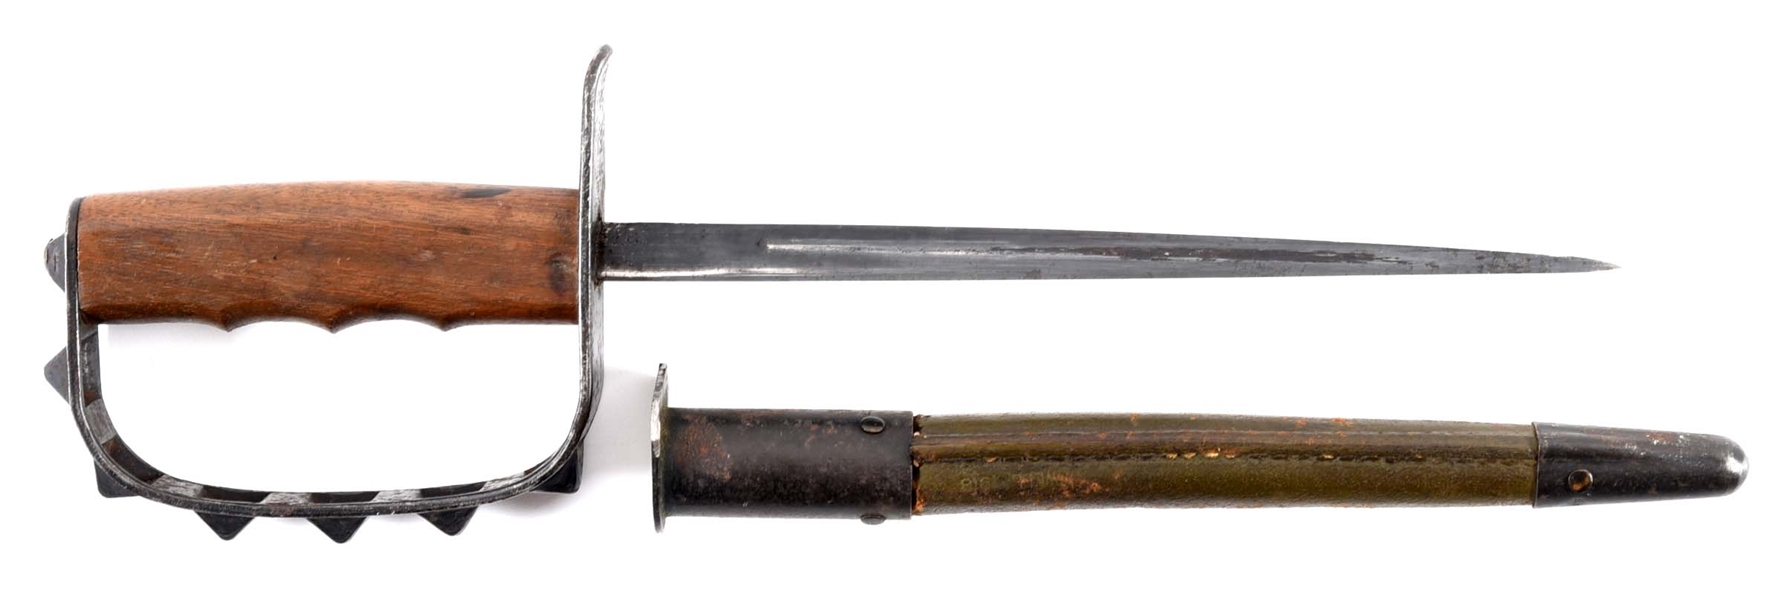 US WWI M1917 TRENCH KNIFE.